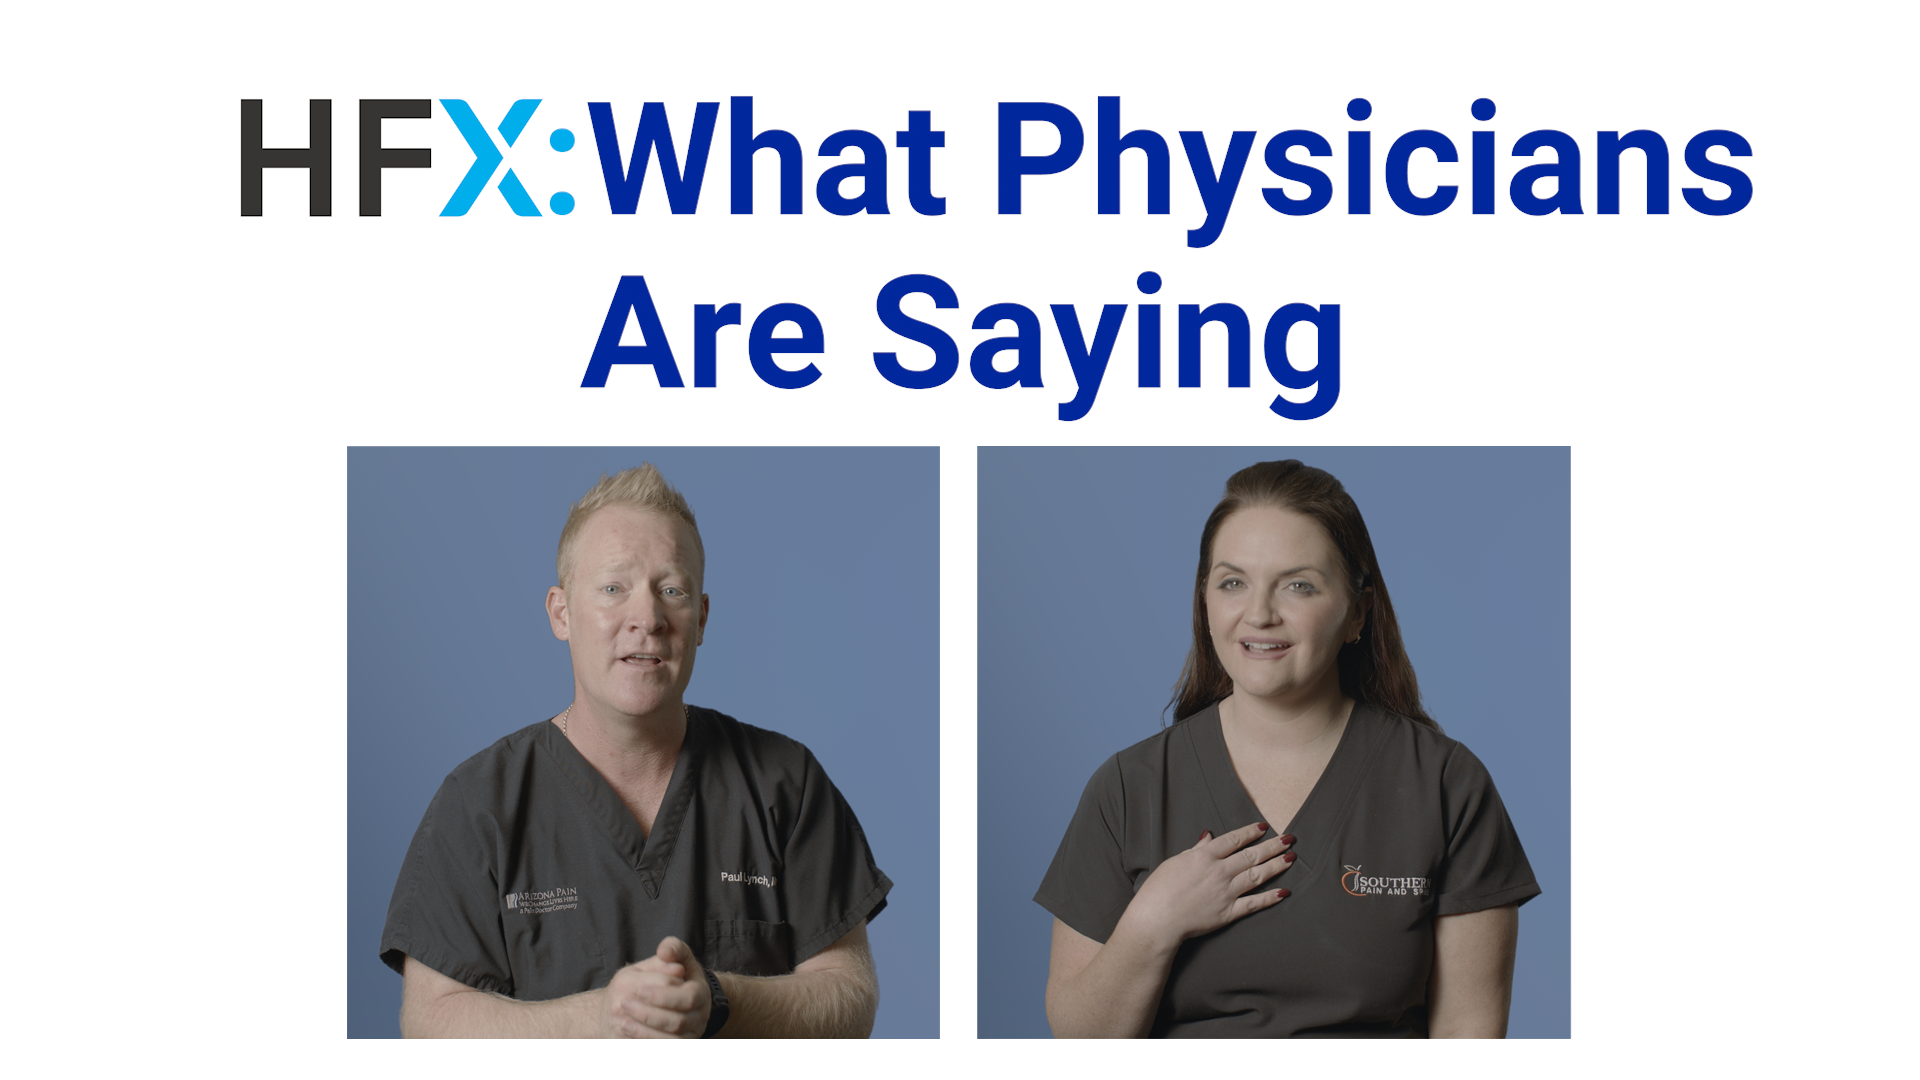 https://www.nevrohfx.com/app/uploads/sites/6/2022/01/What-Physicians-Are-Saying-Thumbnail-1.png